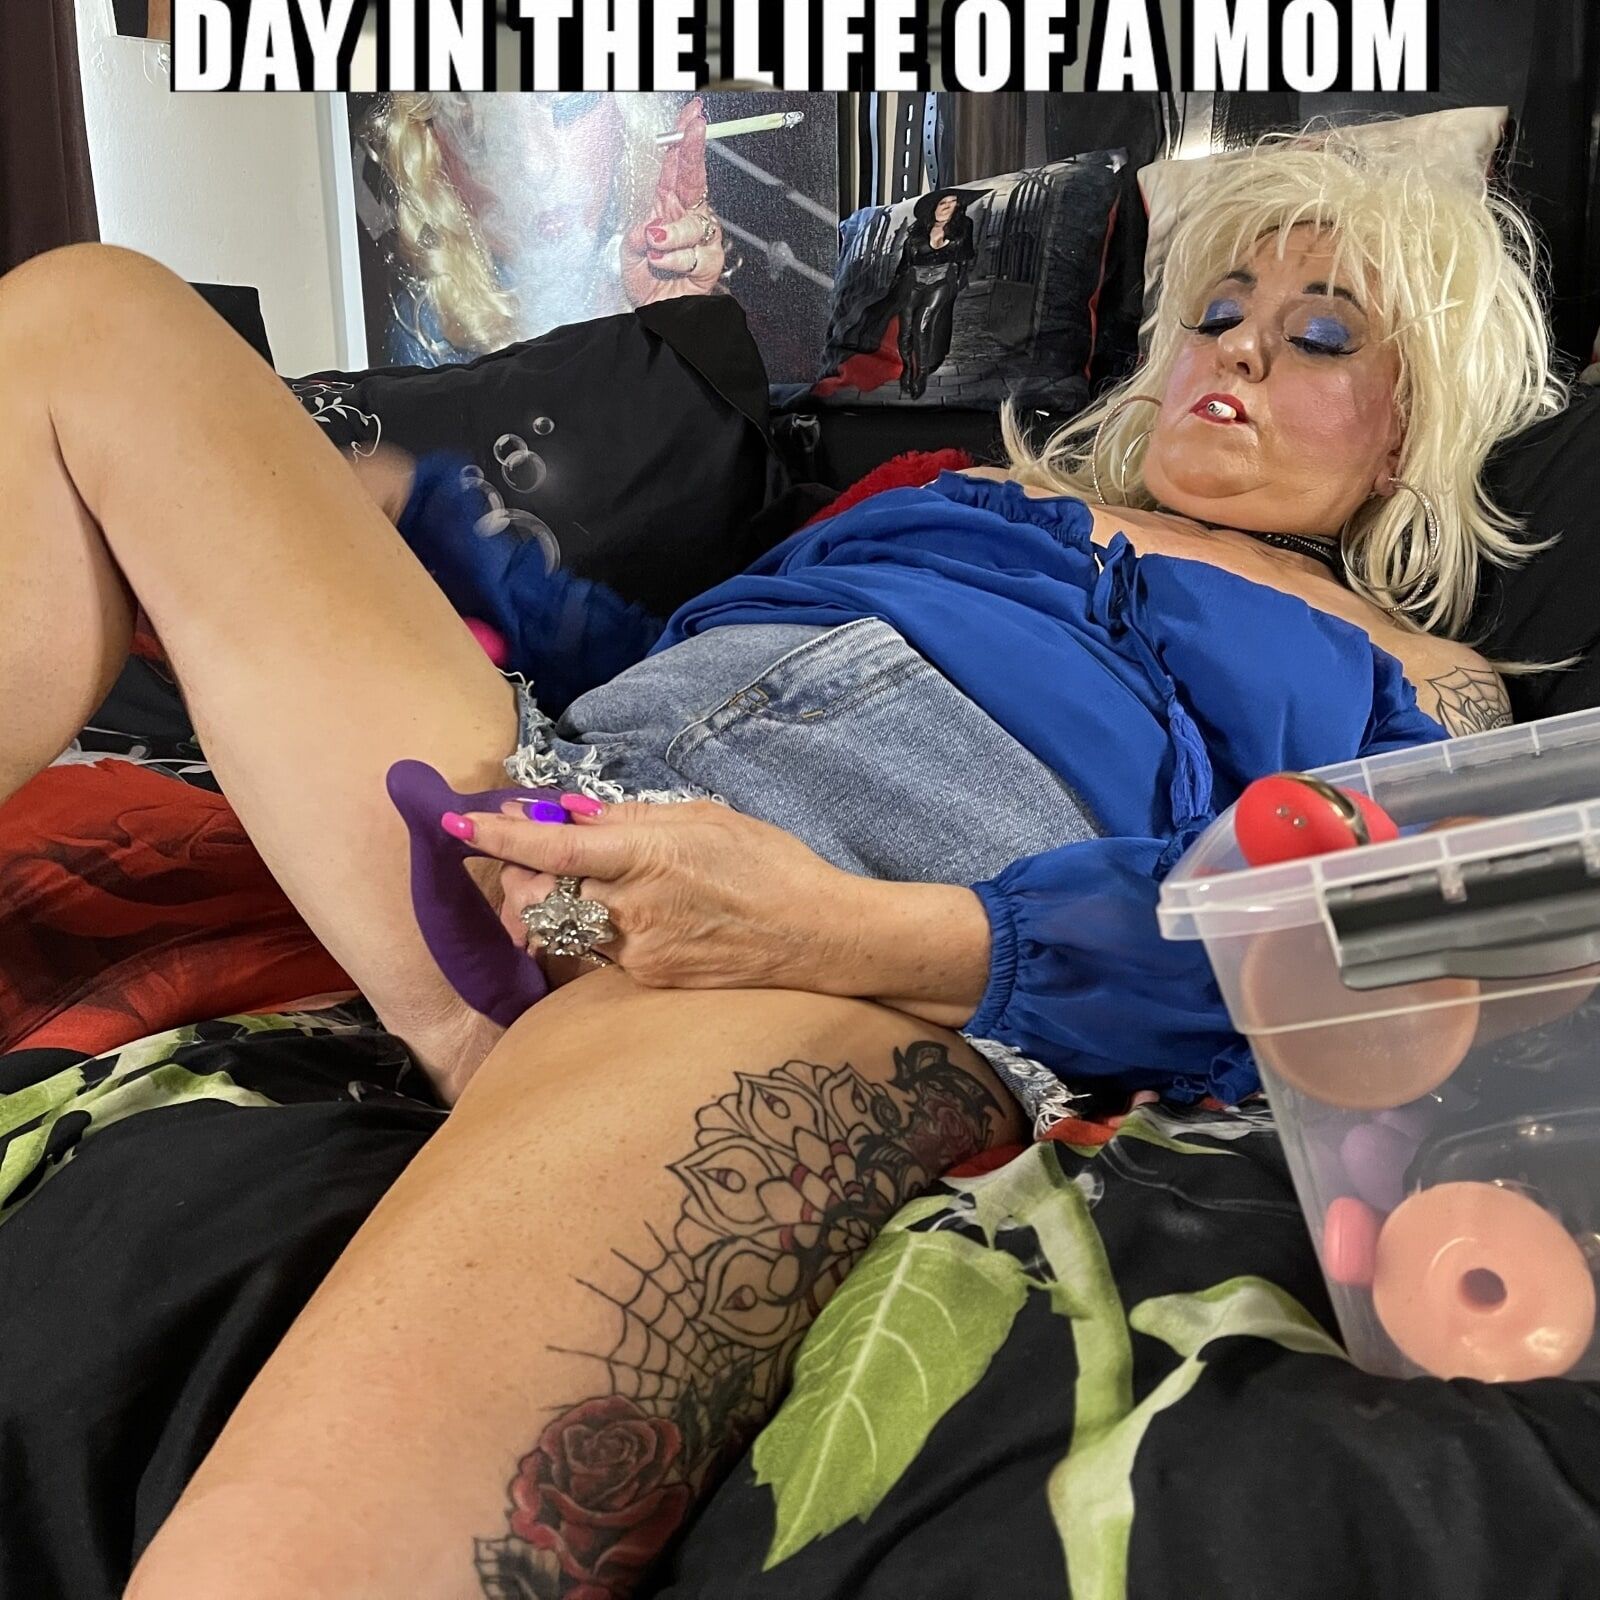 SHIRLEY THE LIFE OF A MOM #16